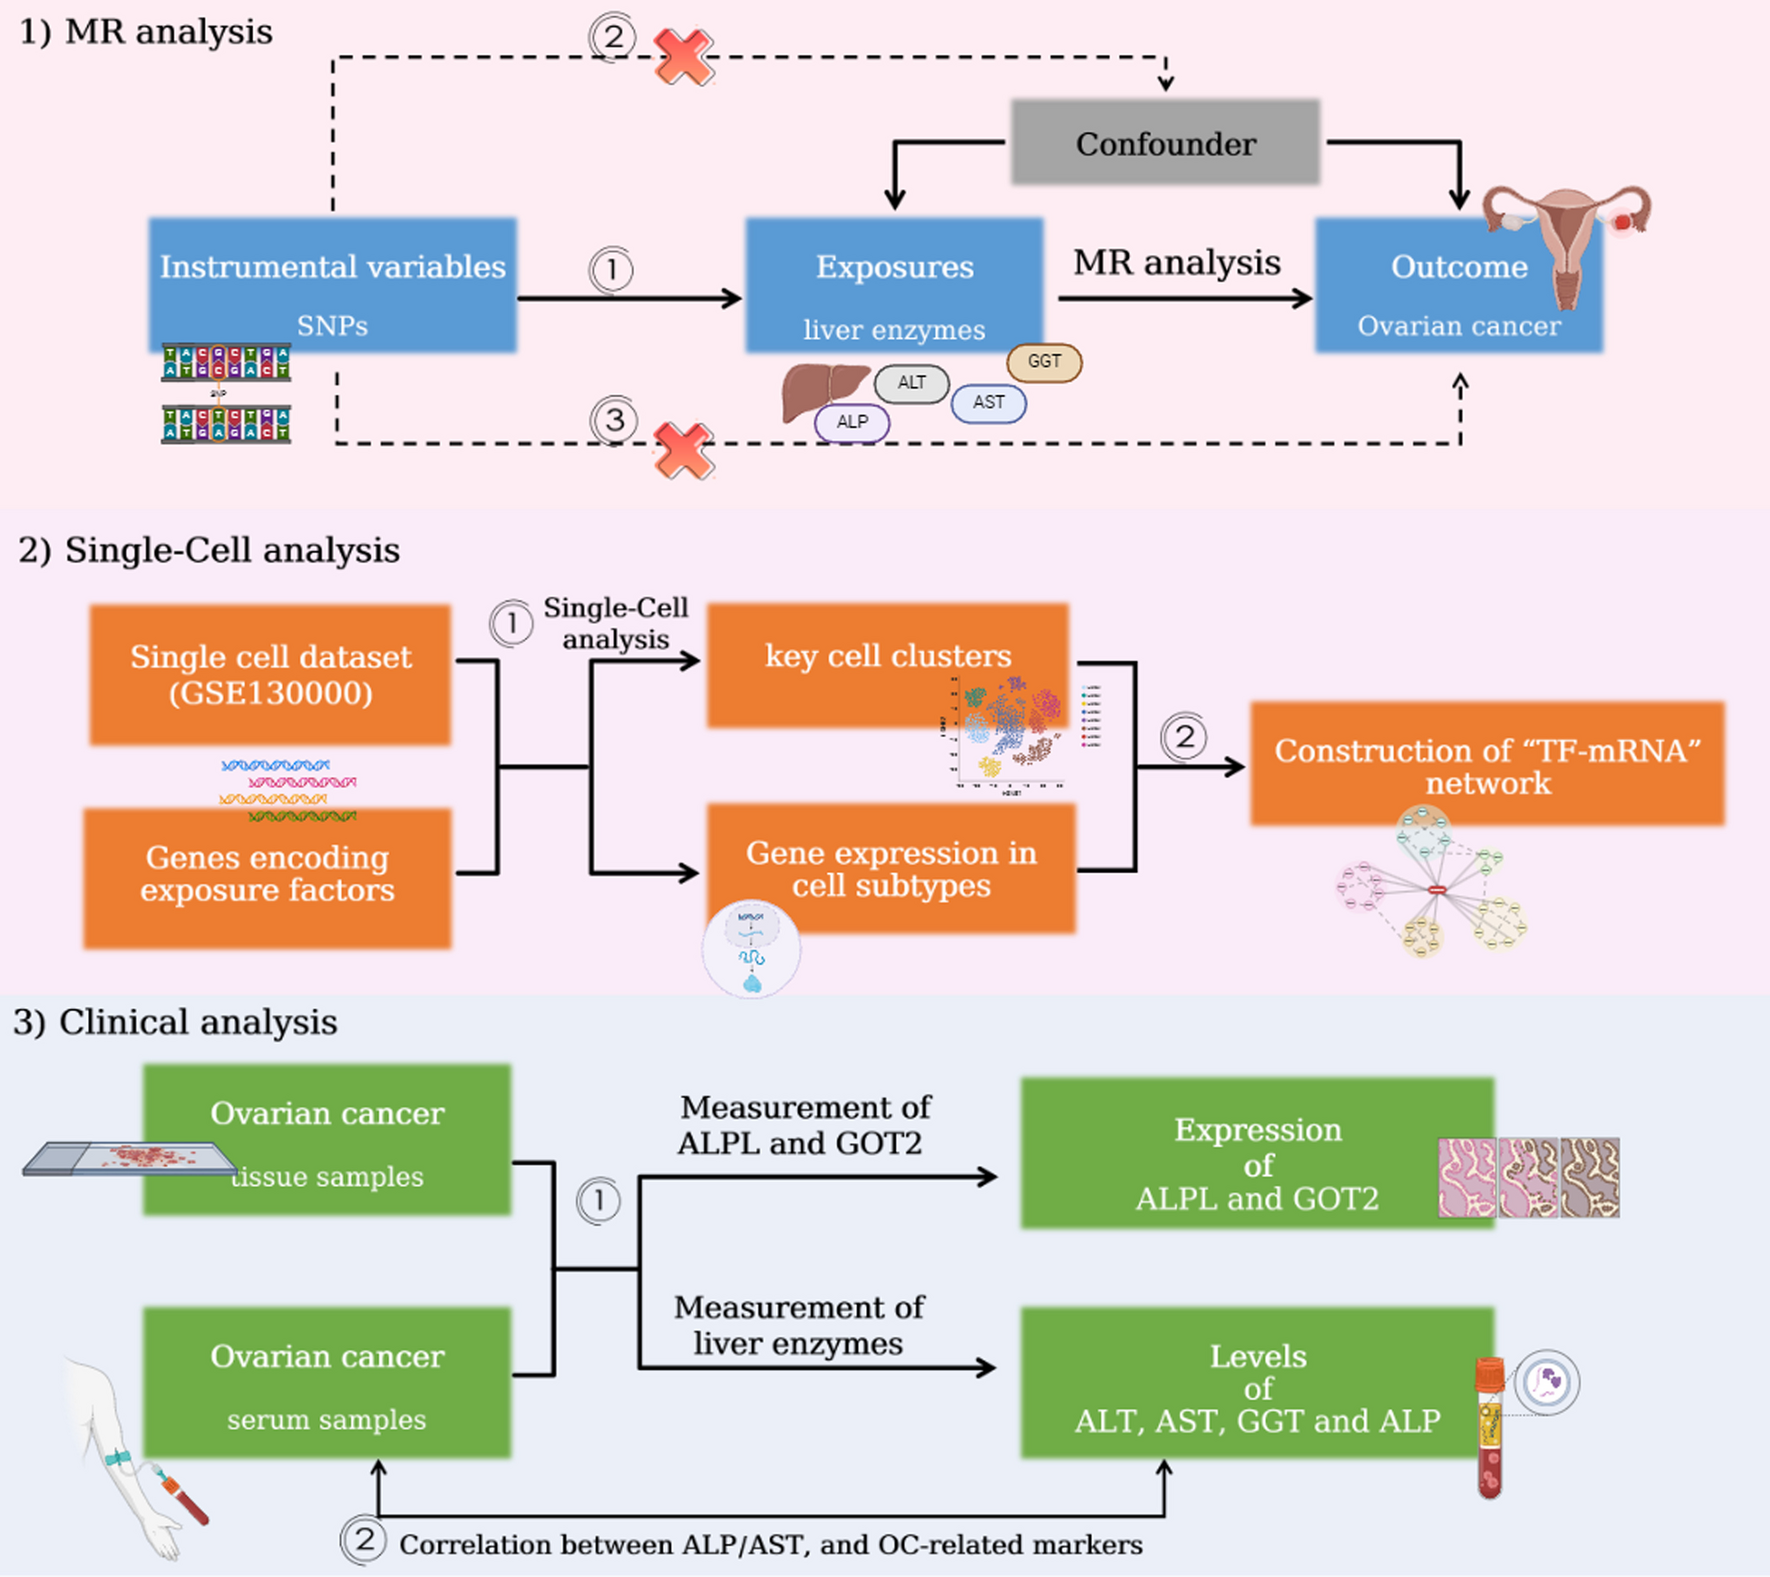 Elucidating the role of liver enzymes as markers and regulators in ovarian cancer: a synergistic approach using Mendelian randomization, single-cell analysis, and clinical evidence